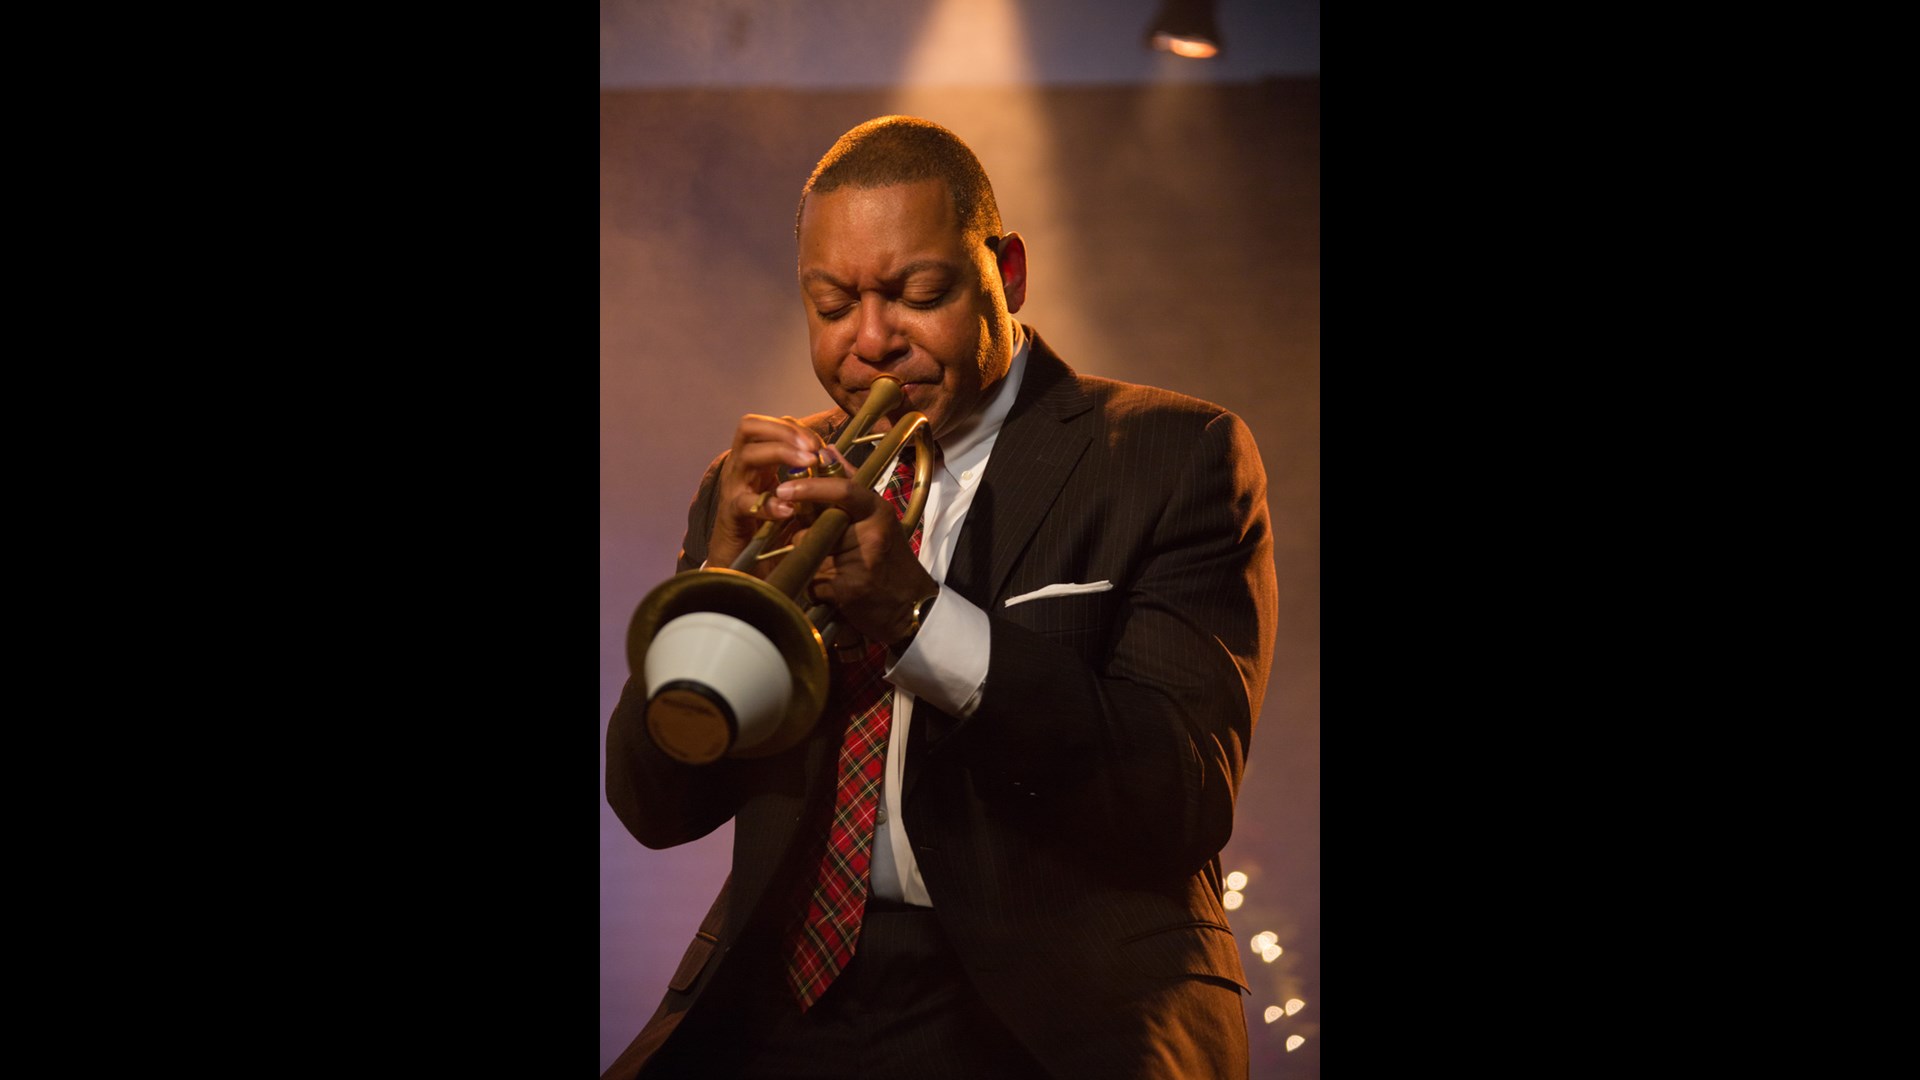 A man with dark complexion and buzzed hair playing trumpet. He is wearing a suit and plaid tie.